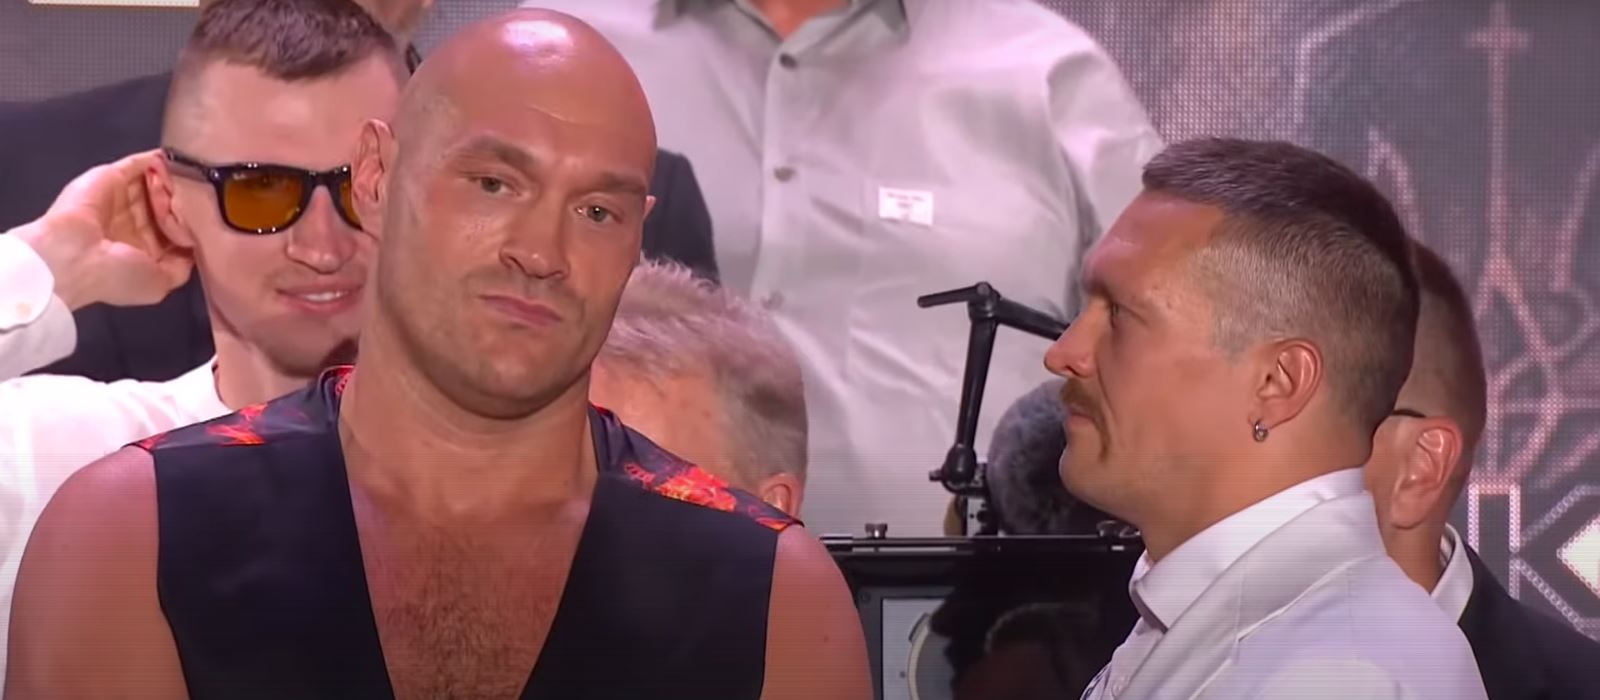 Tyson Fury vs Usyk The Spectacle that Revives Heavyweight Boxing's Pop Culture Status